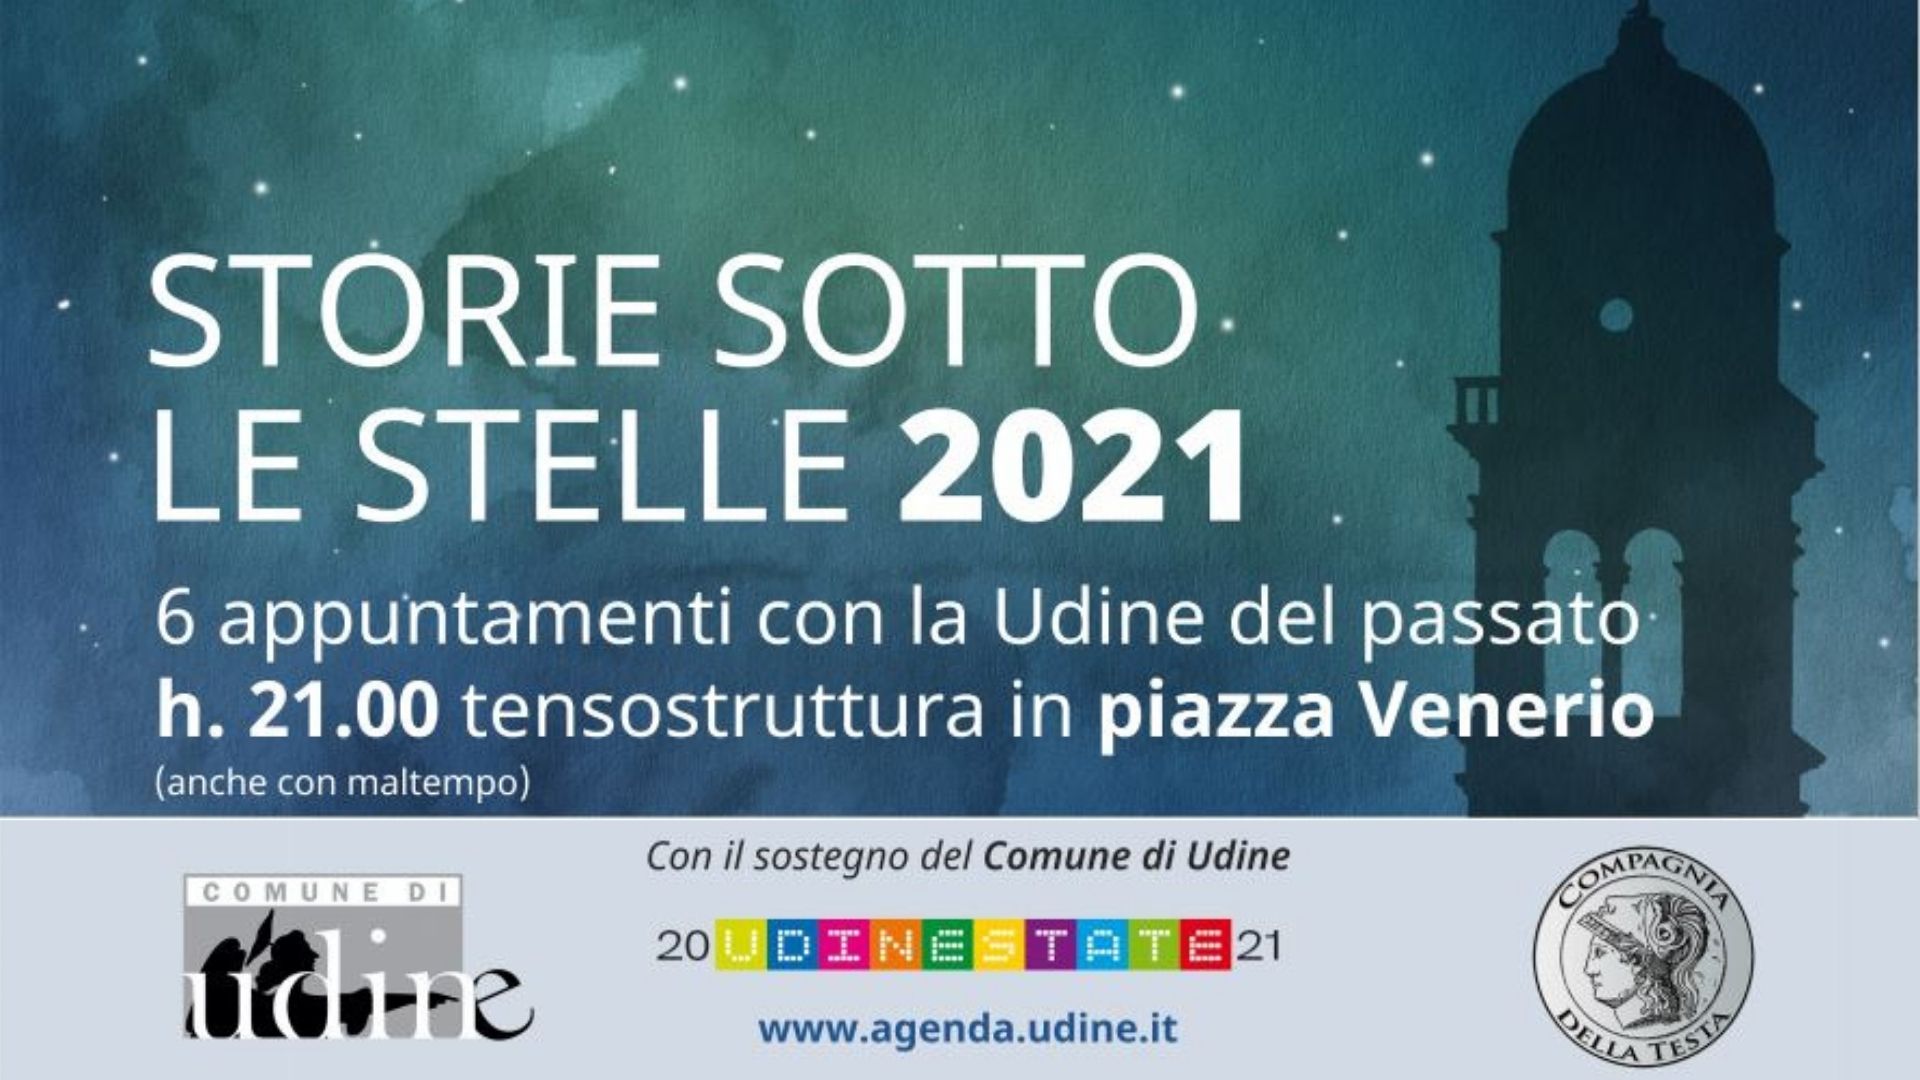 Storie Sotto le Stelle 2021 - Udine - EventiFVG.it